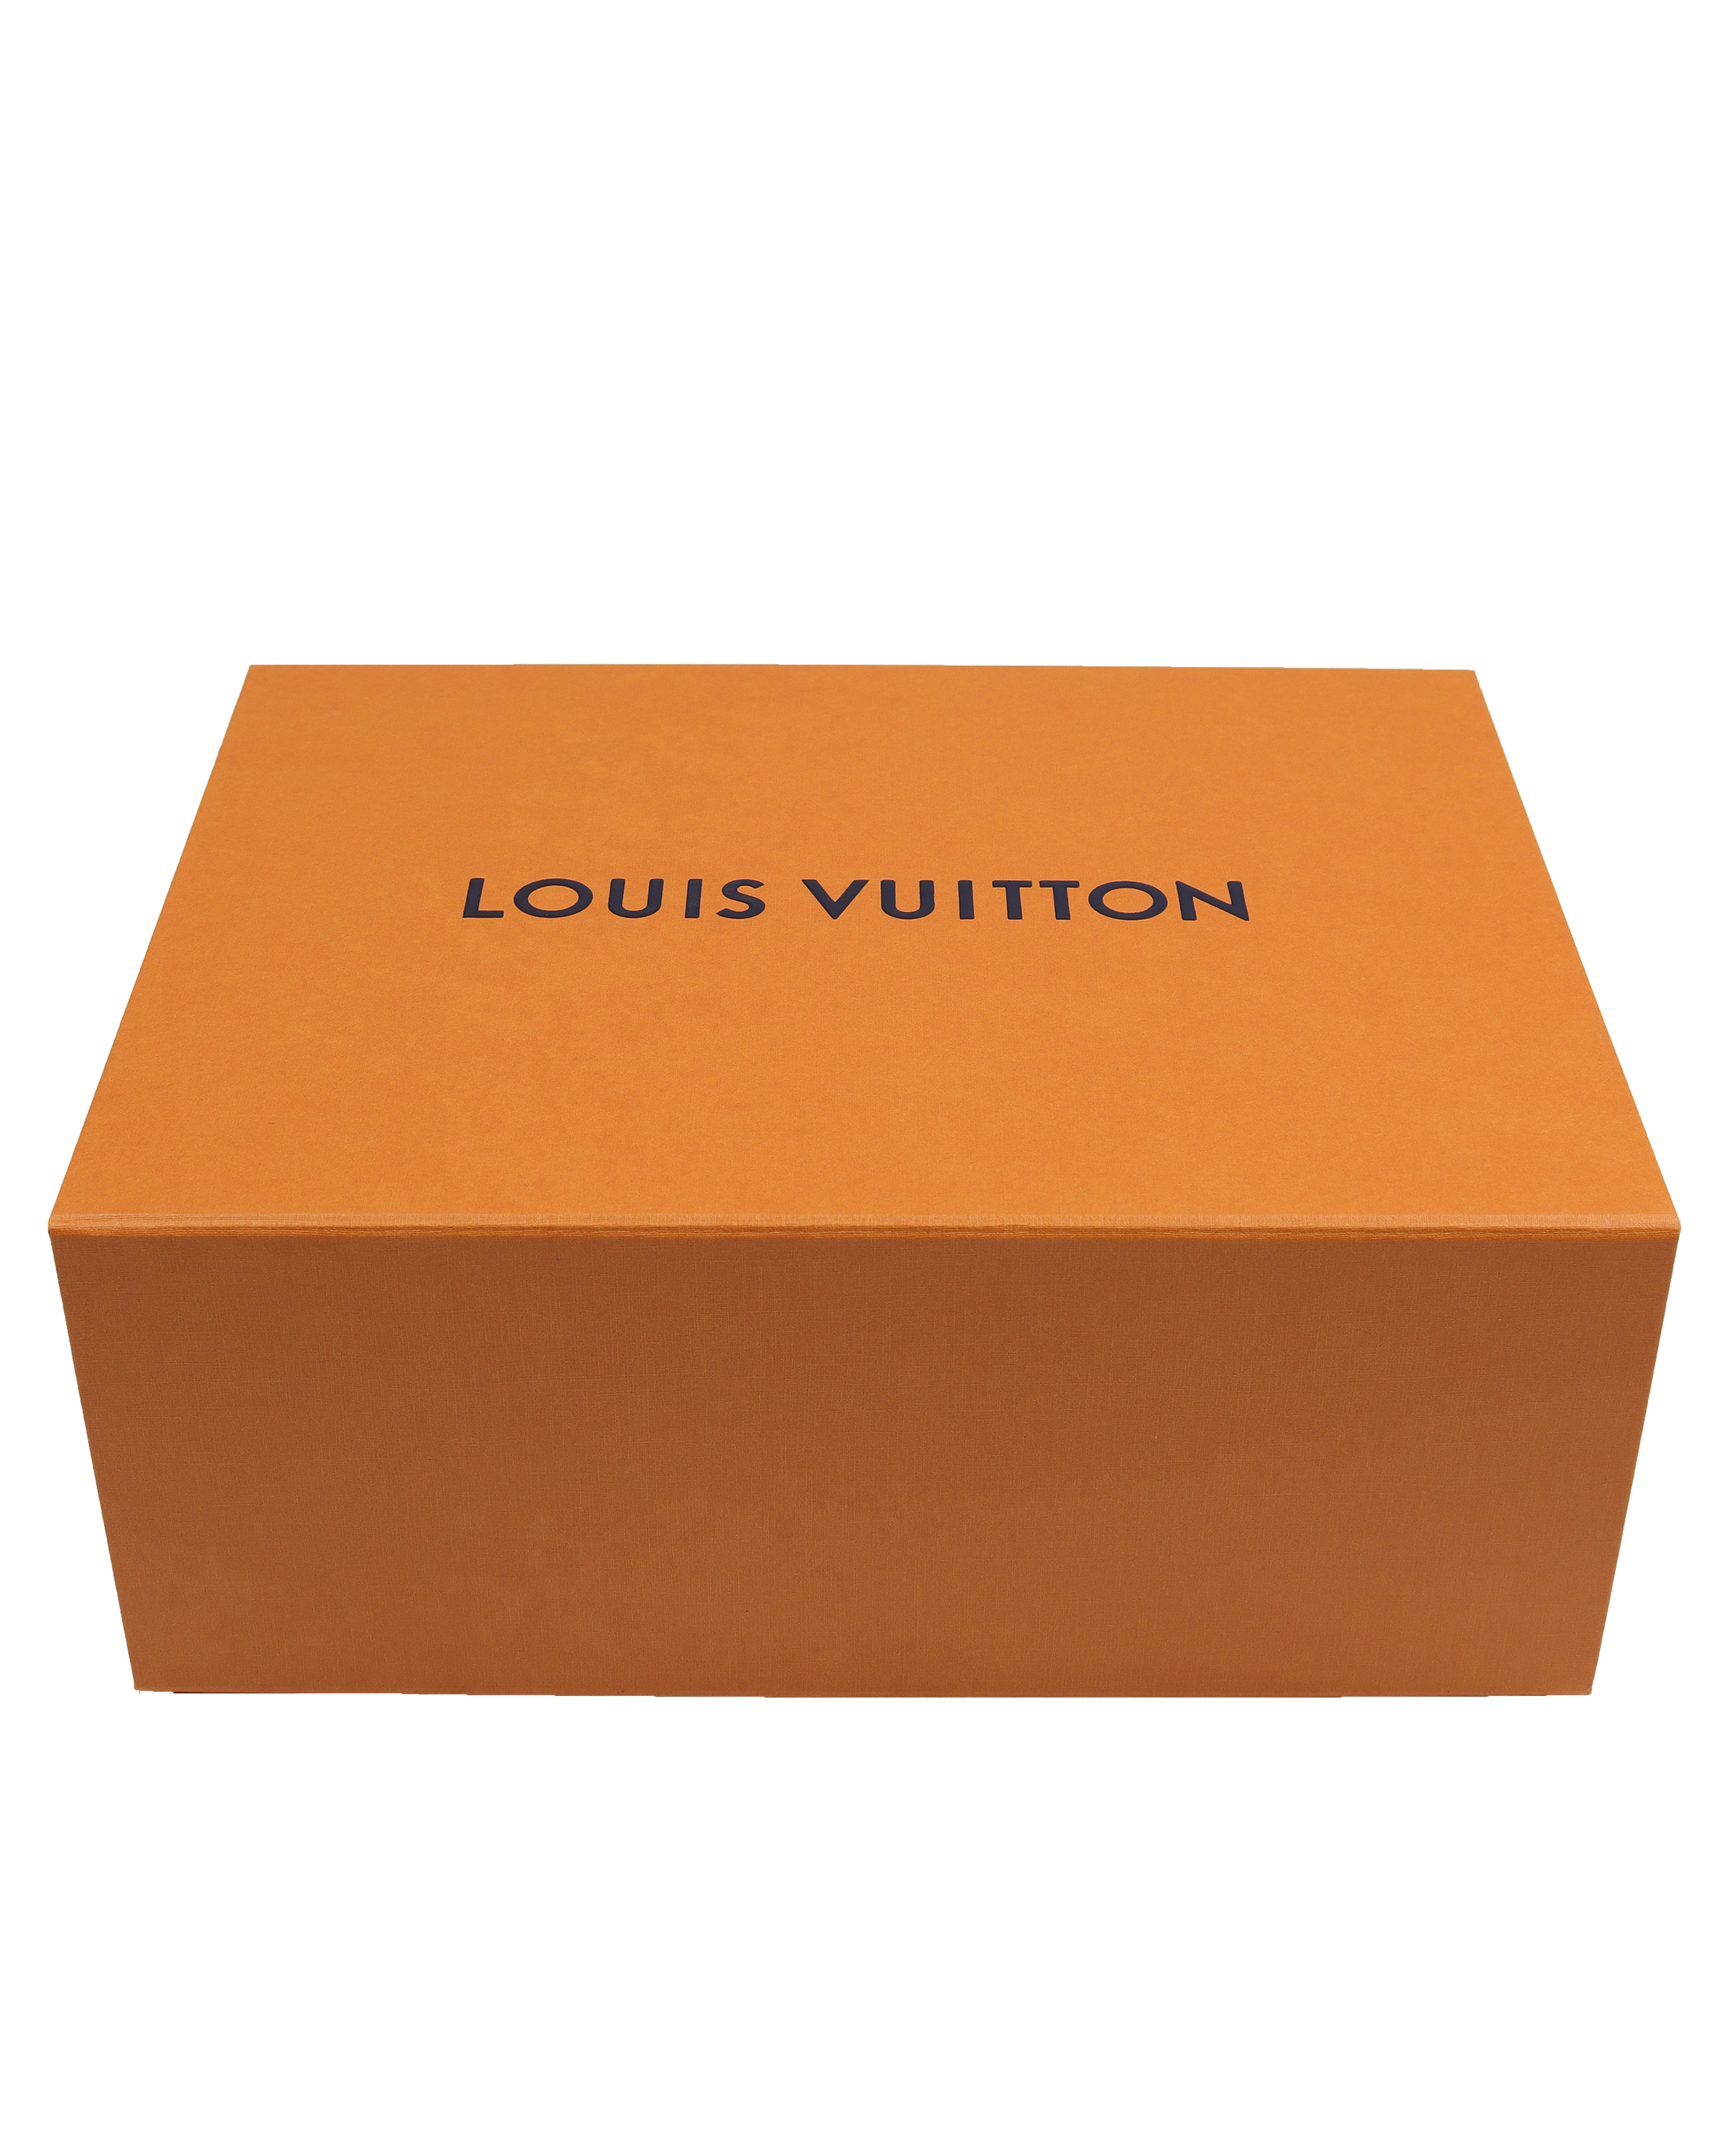 Louis Vuitton NYC Soho Pop-Up Exclusive Trainer